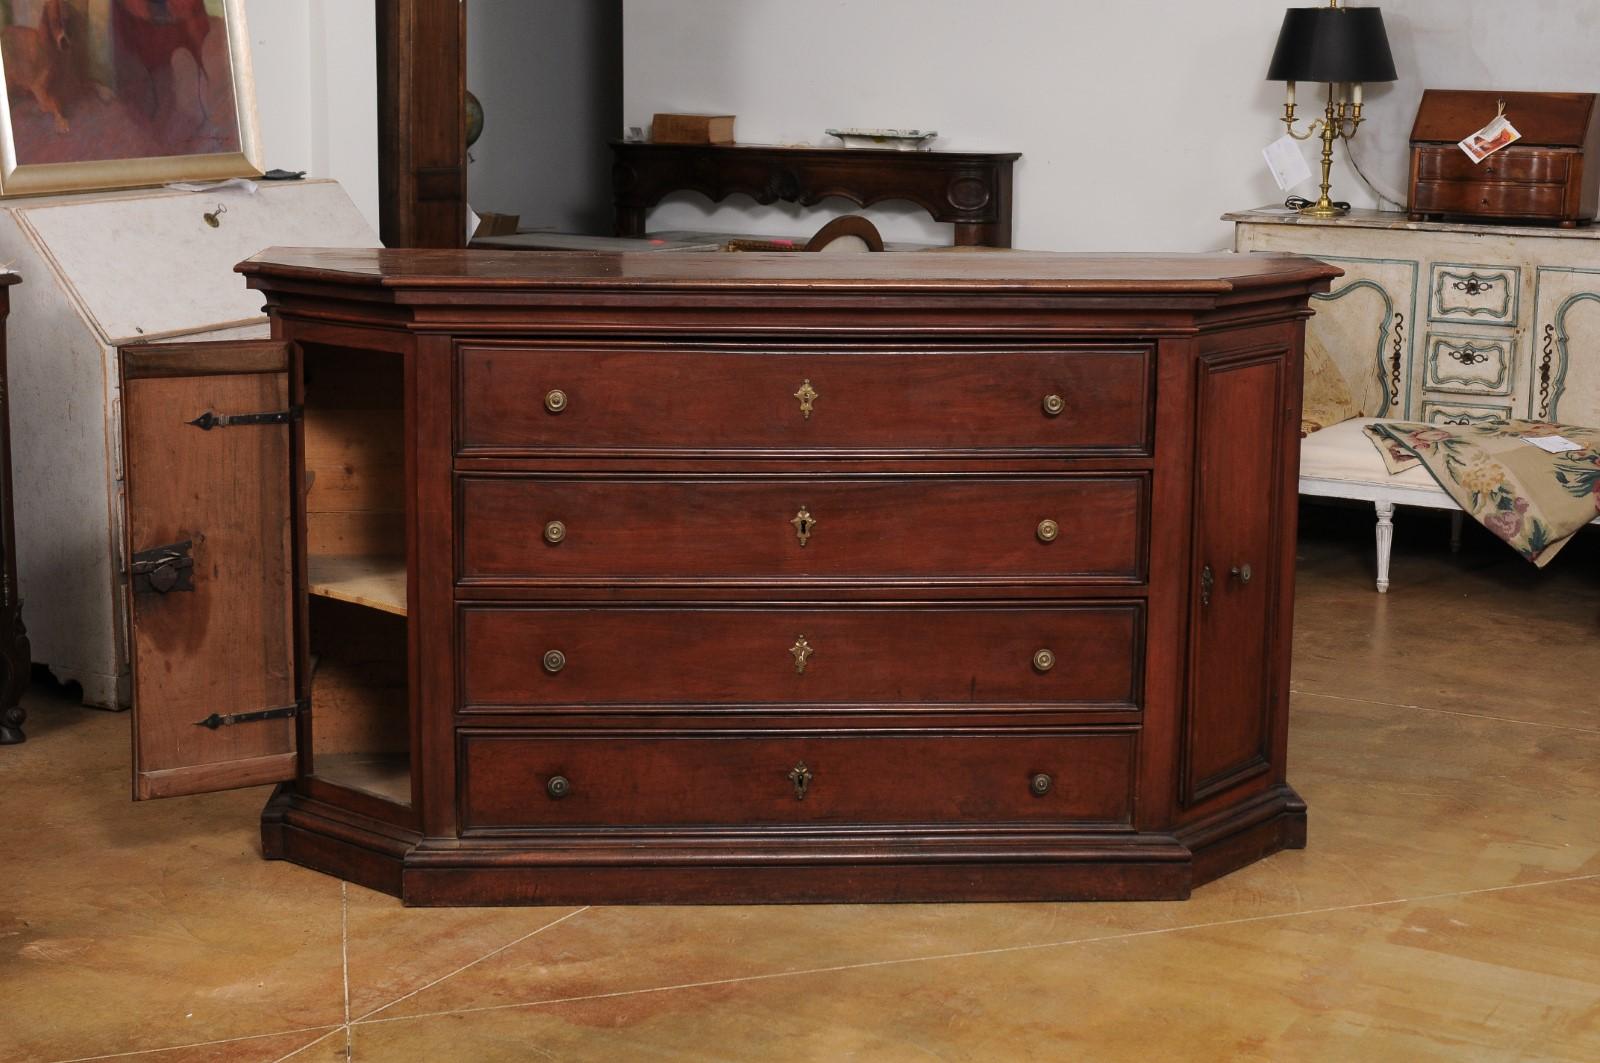 Bronze Italian 17th Century Walnut Dresser with Four Drawers and Canted Side Doors